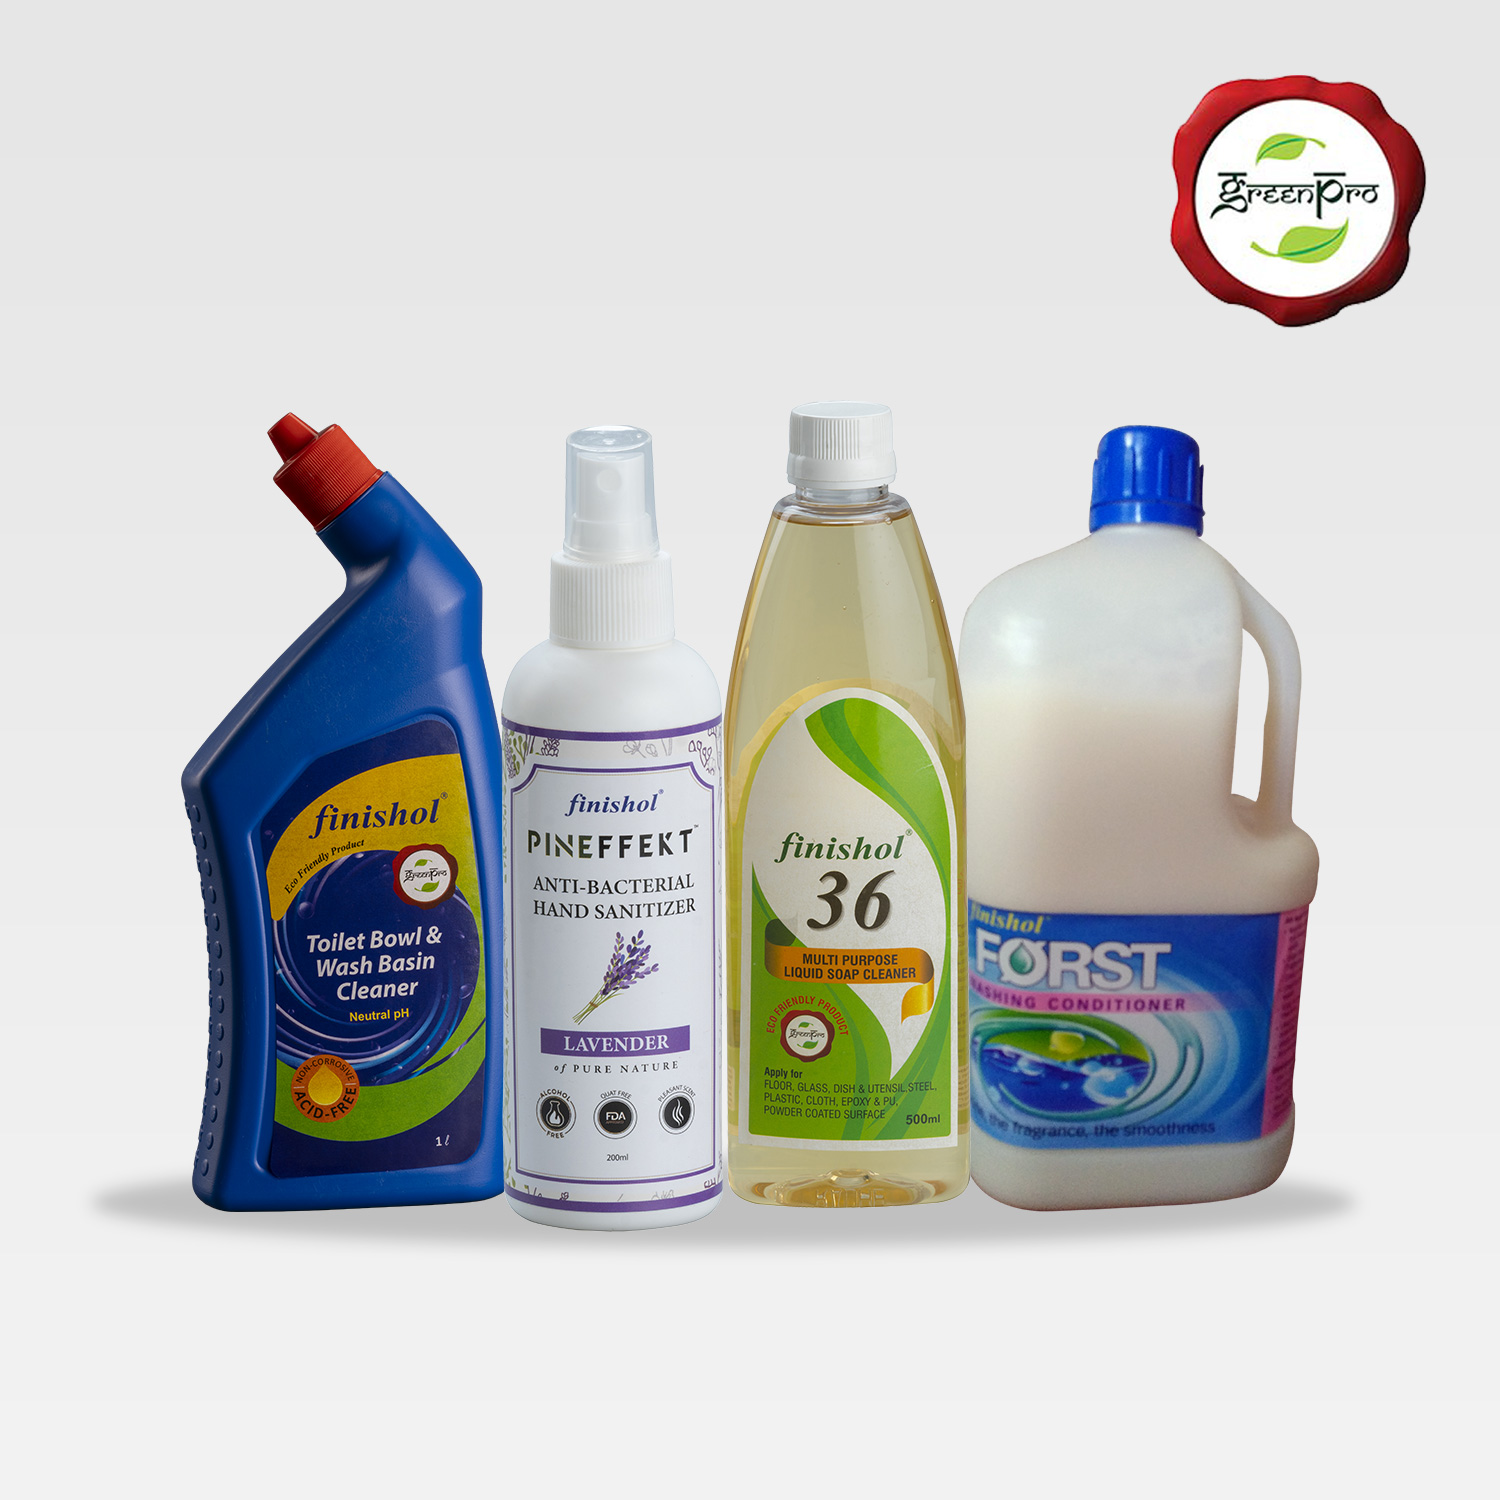 Biodegradable Fabric Conditioner, Toilet Bowl Cleaner, Multipurpose Cleaner & Hand Sanitizer